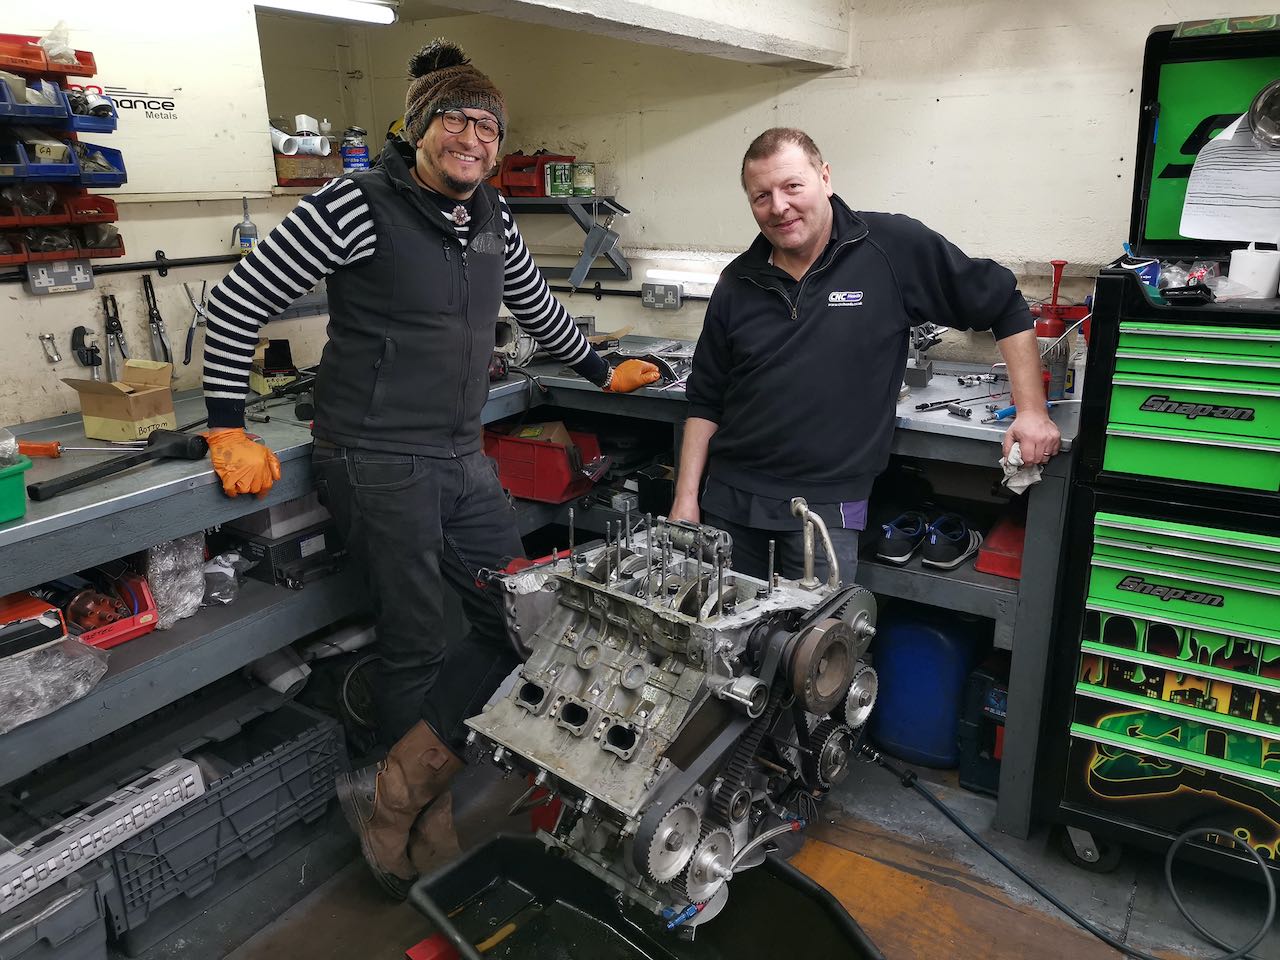 Fuzz and Tim are back with a new series of Car SOS